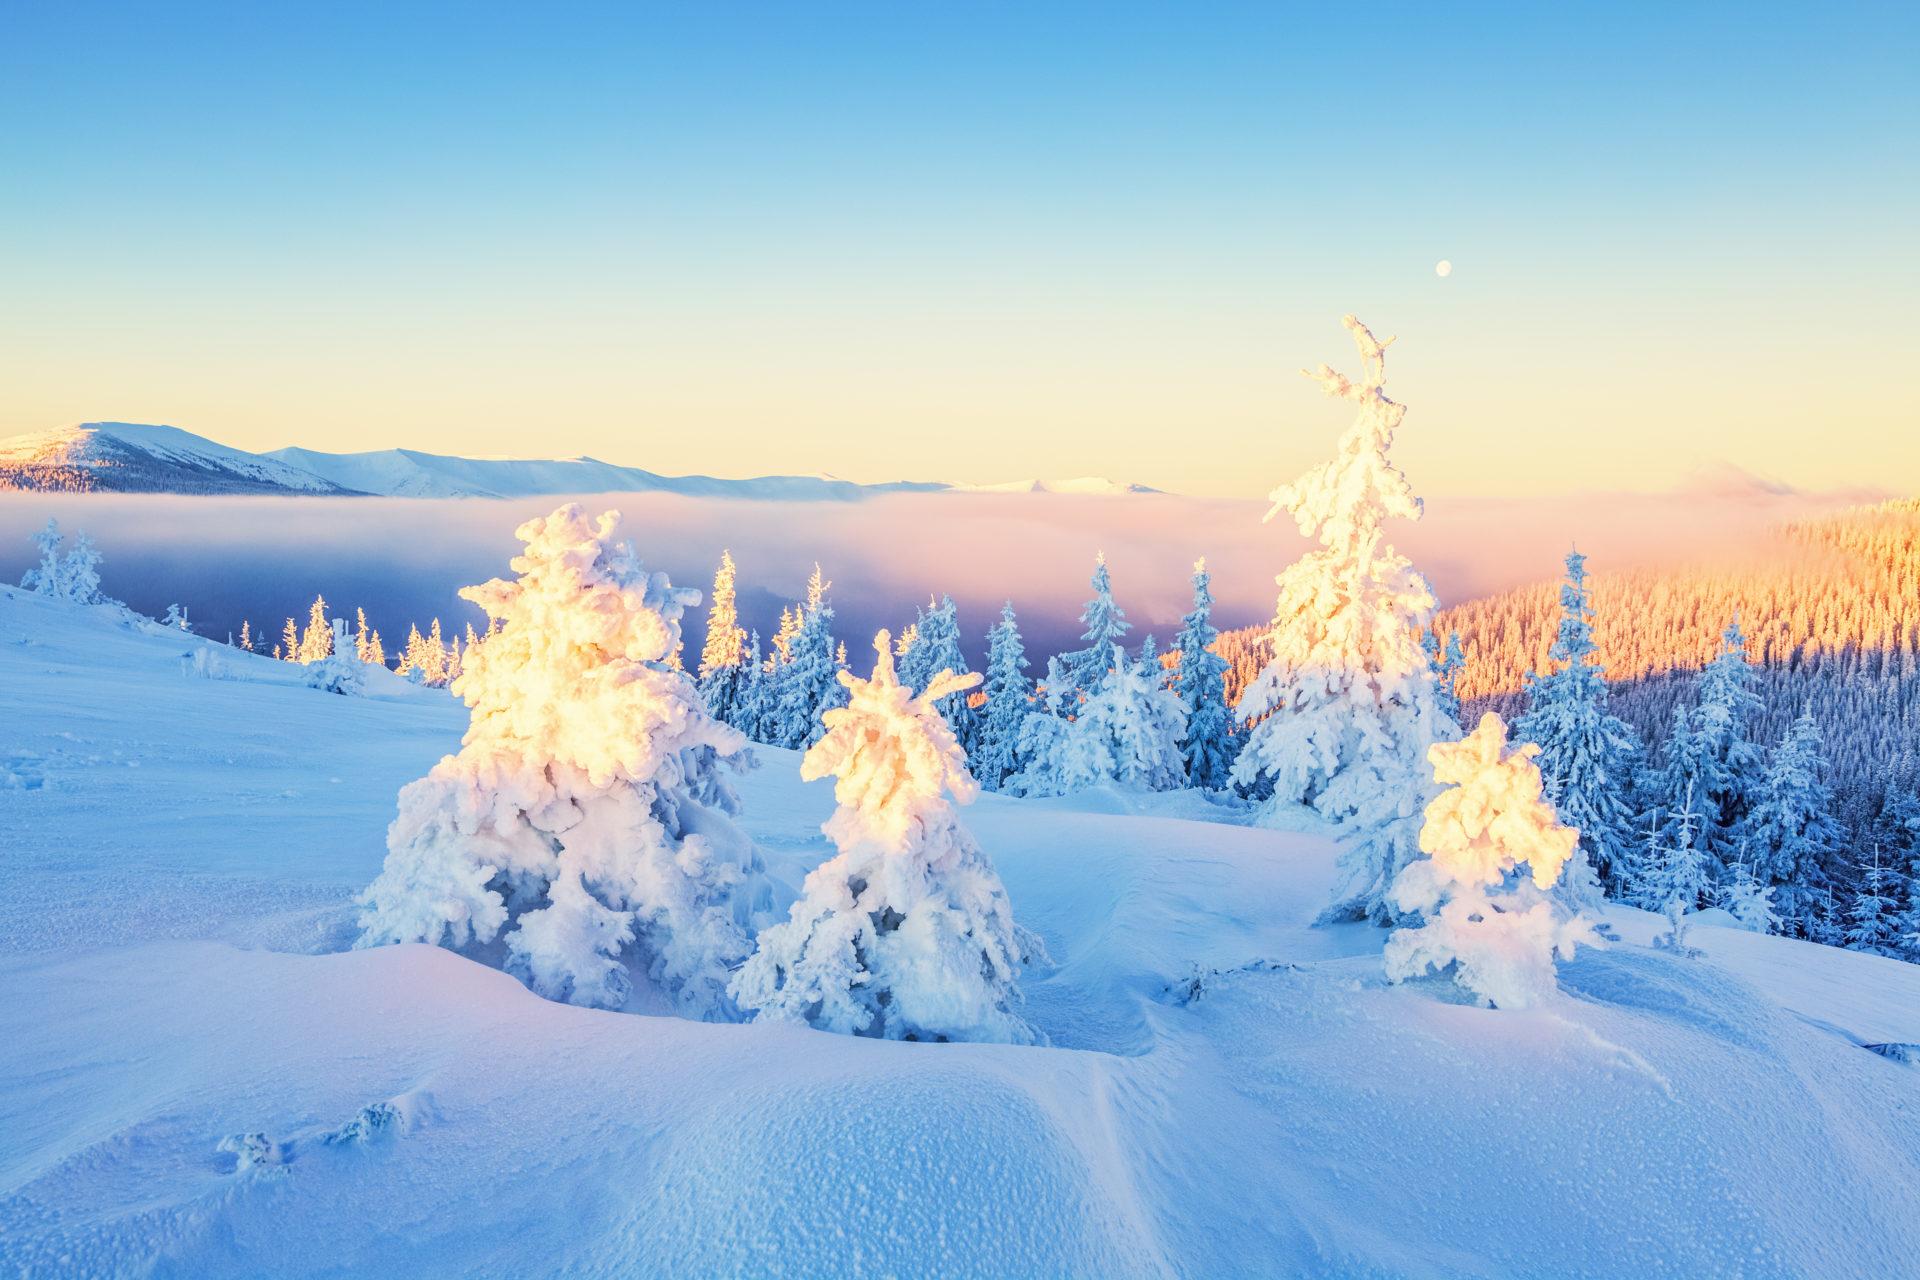 My Winter HD Wallpapers New Tab Theme